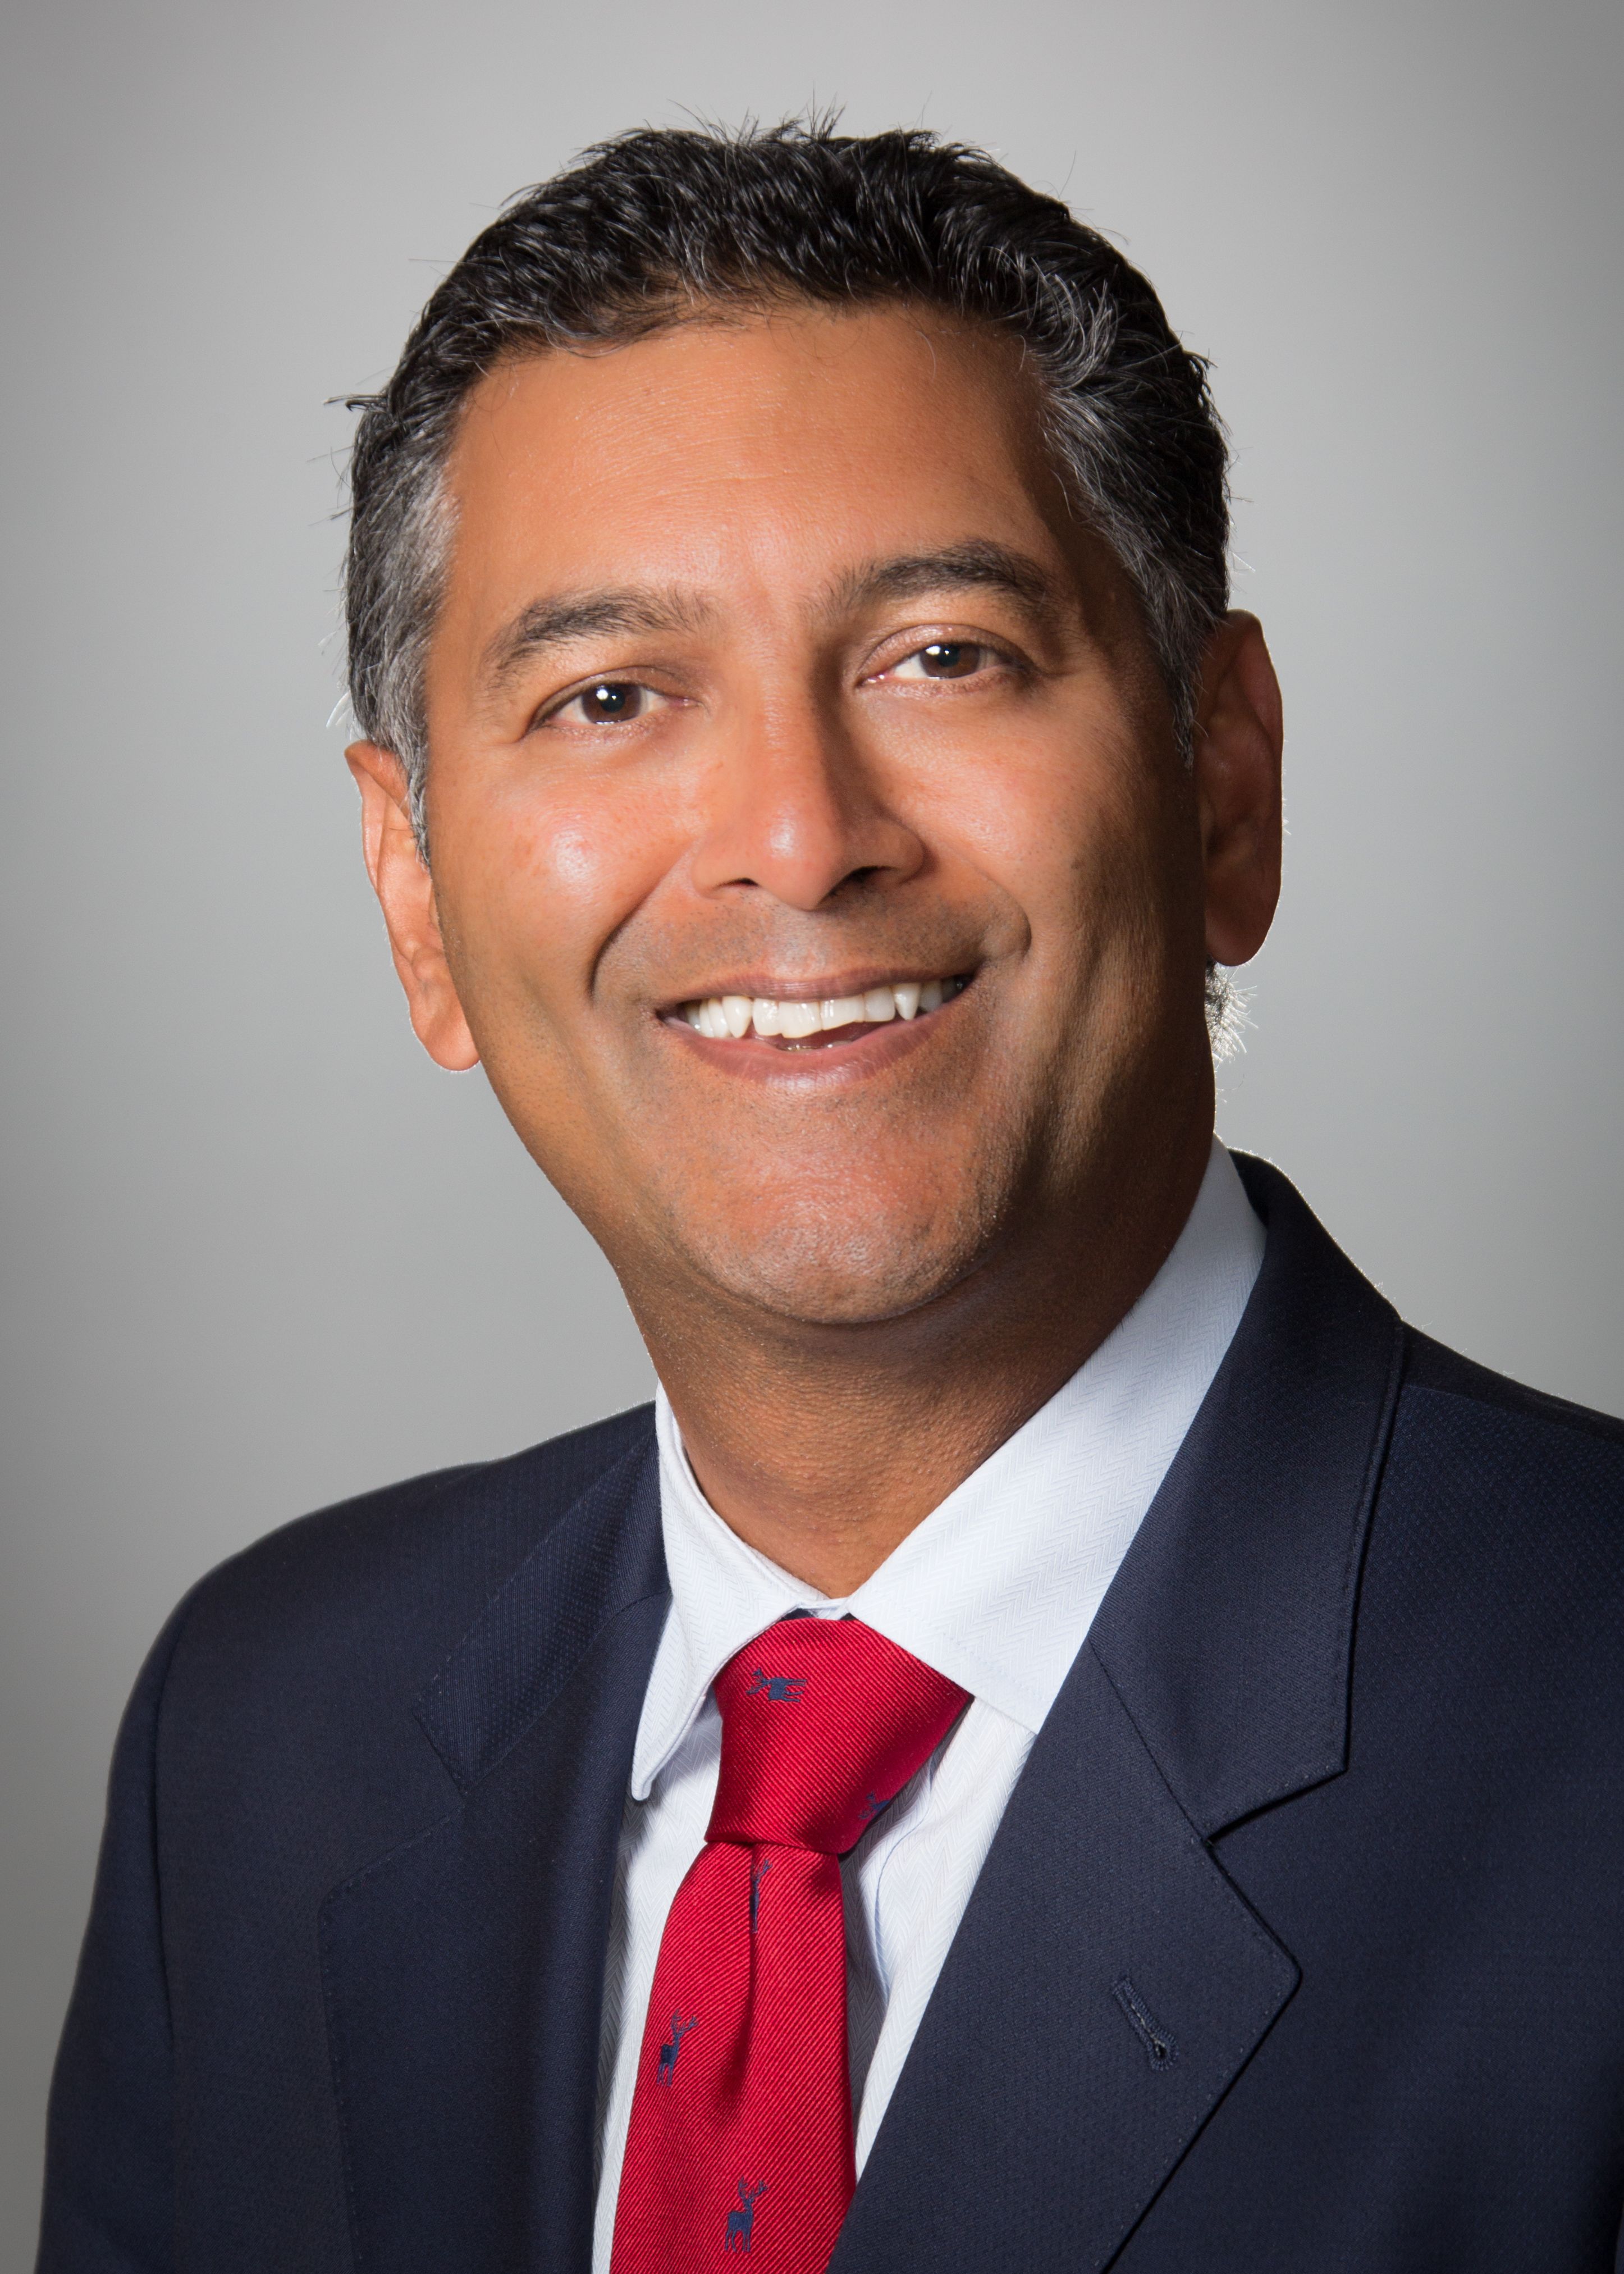 Varinder Singh, MD, wearing a suit and red tie